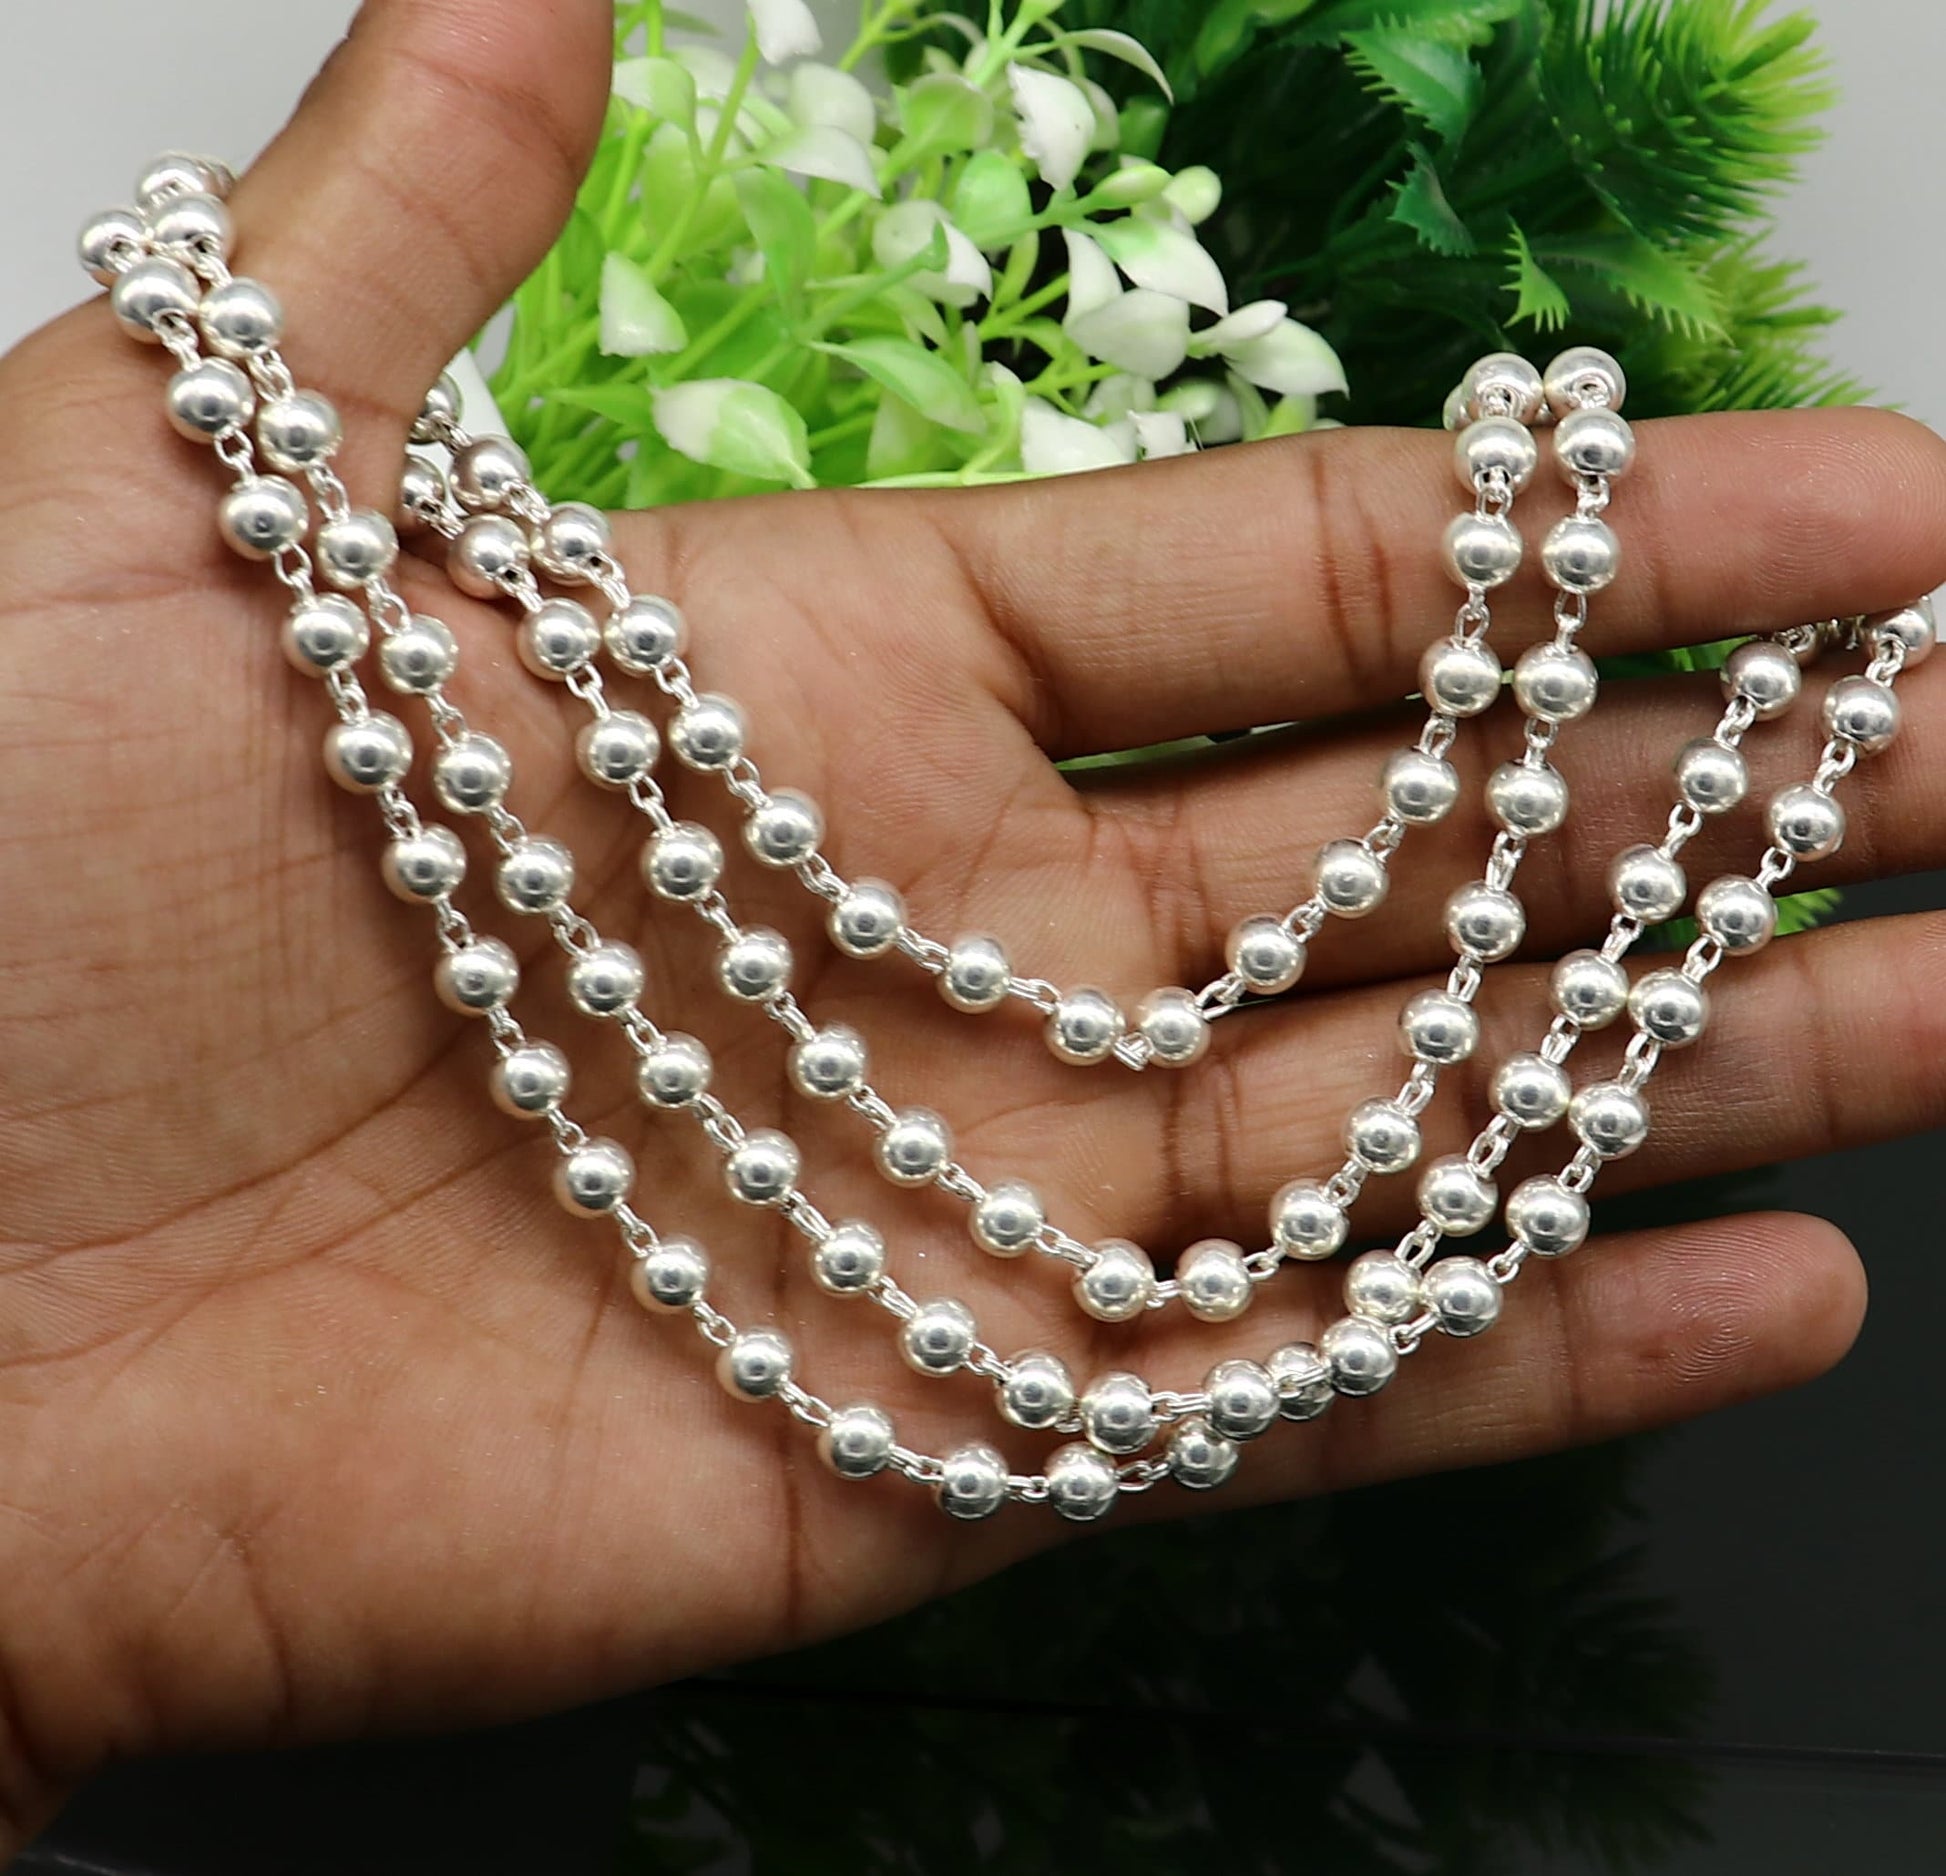 925 sterling silver stunning plain solid beads chain japp mala 108 beads japp chain 39 inches long unisex necklace stylish jewelry ch110 - TRIBAL ORNAMENTS